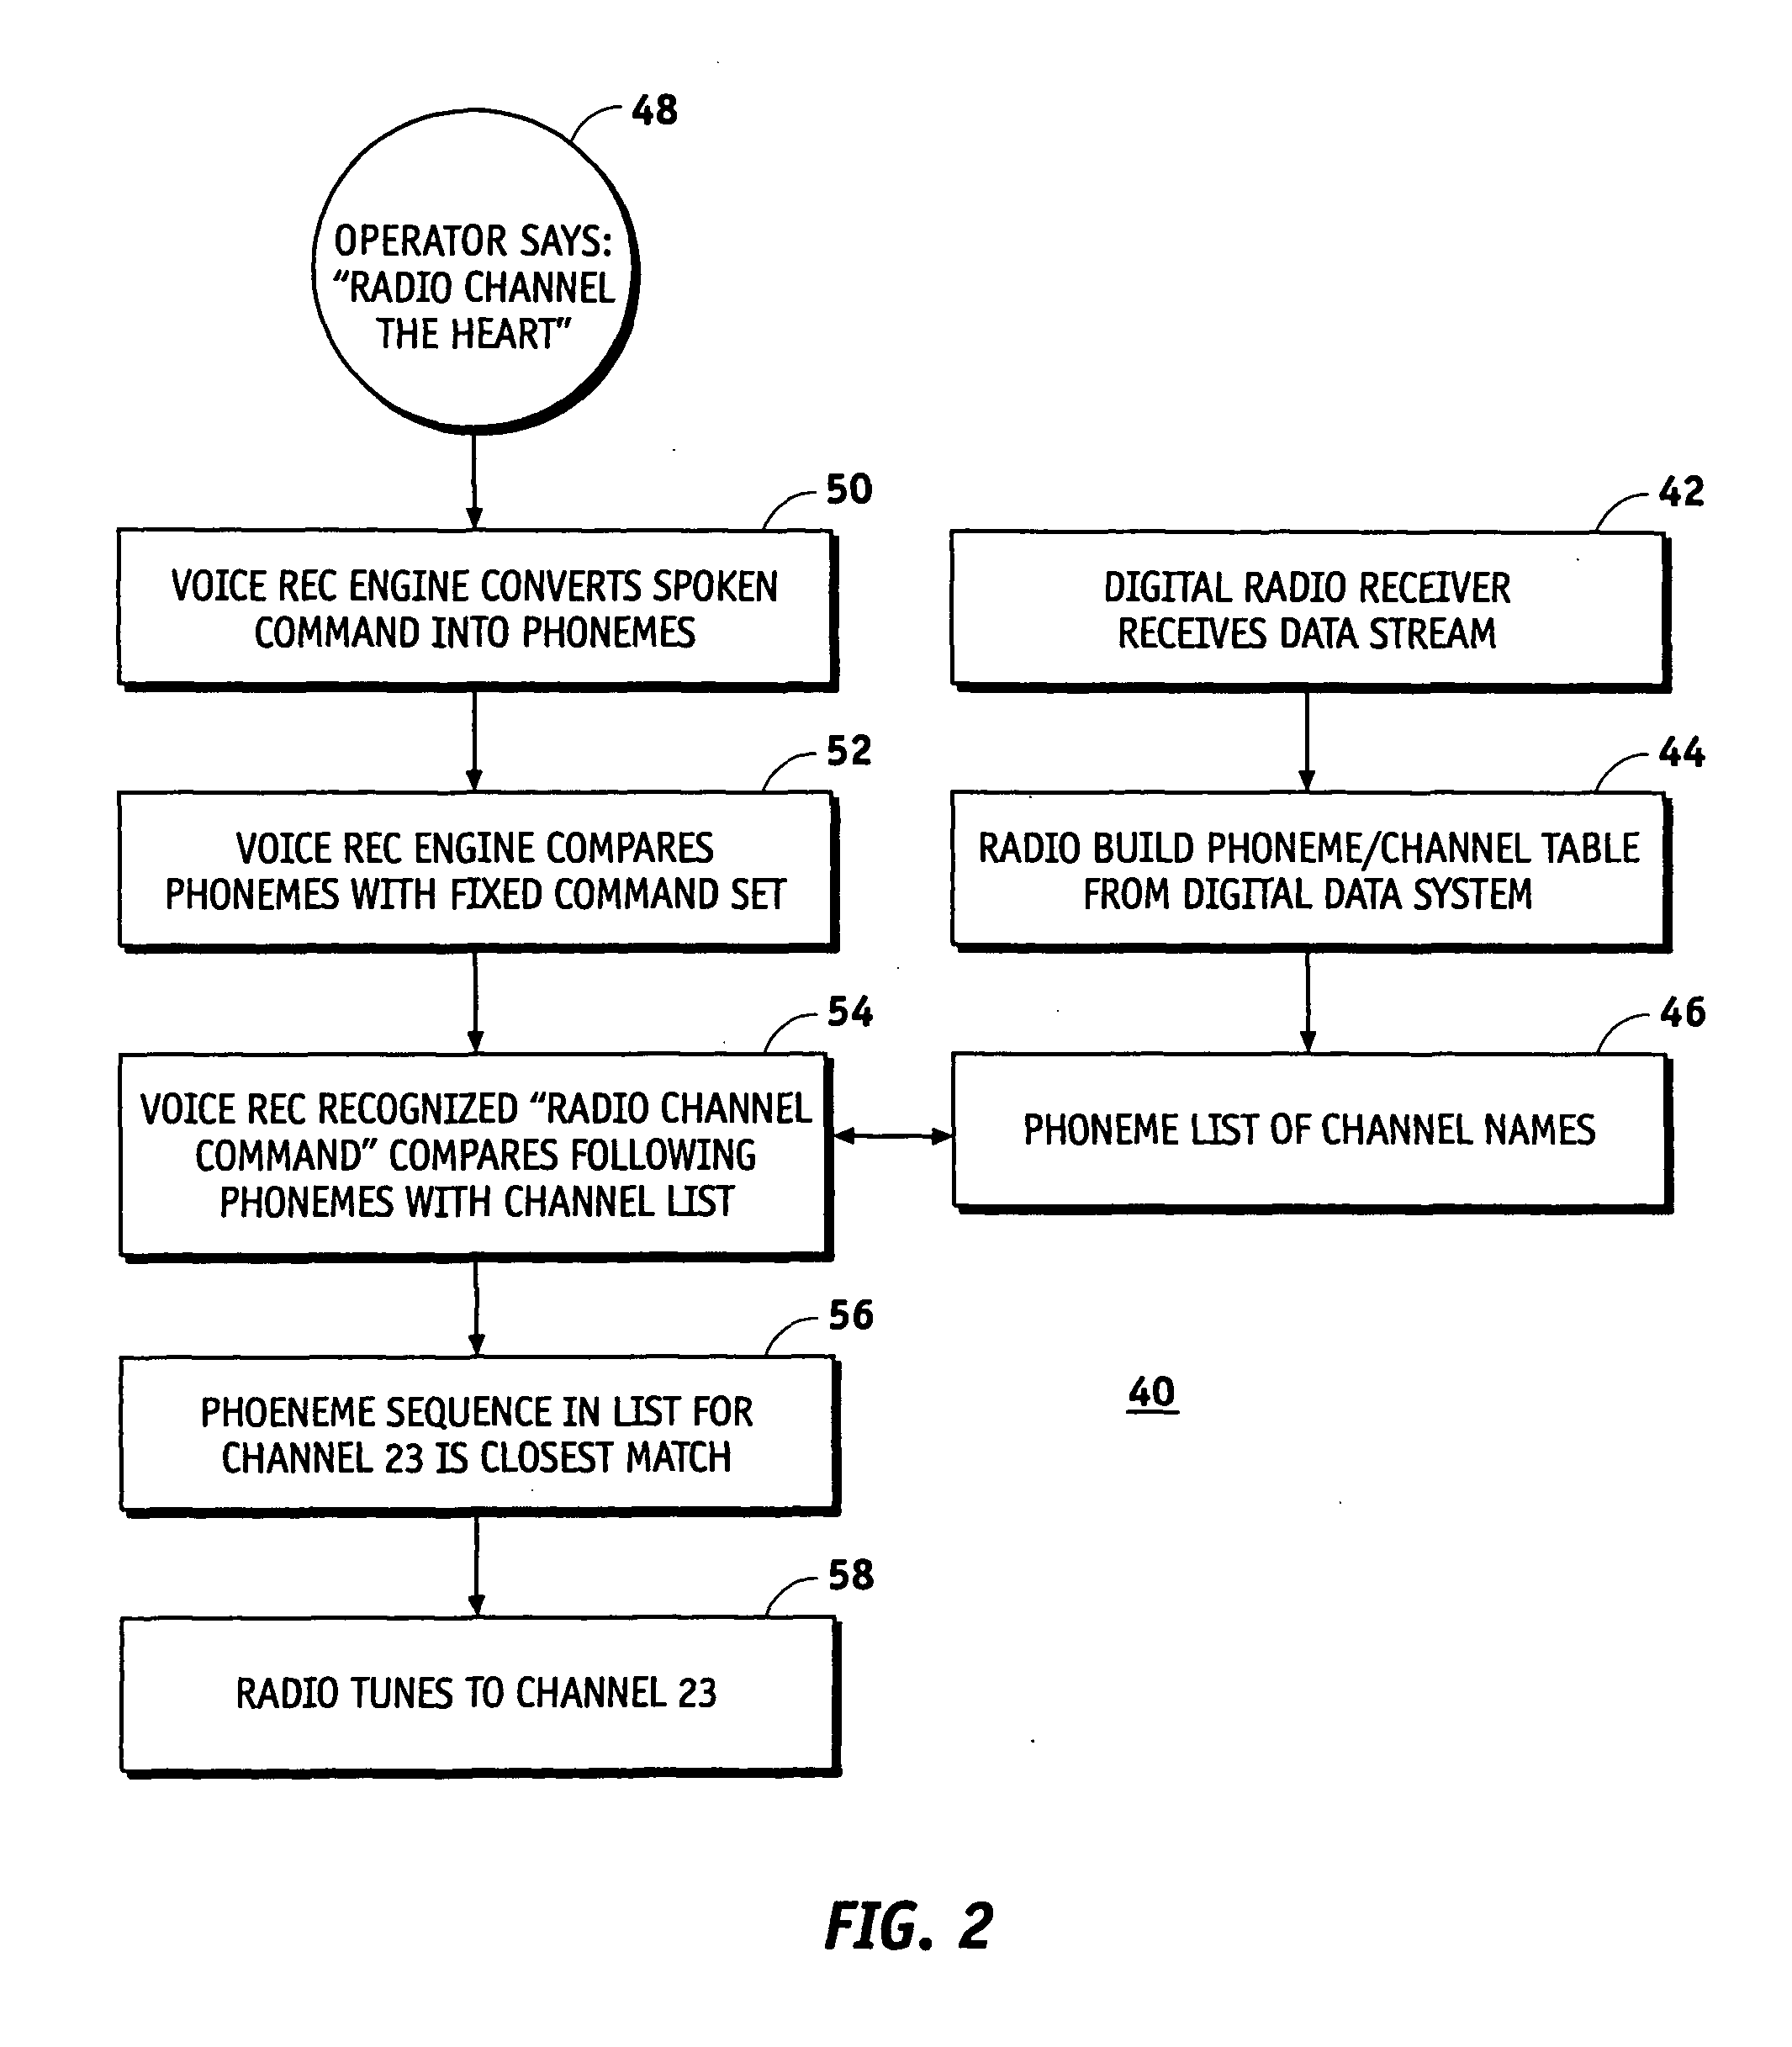 Voice recognition in a vehicle radio system